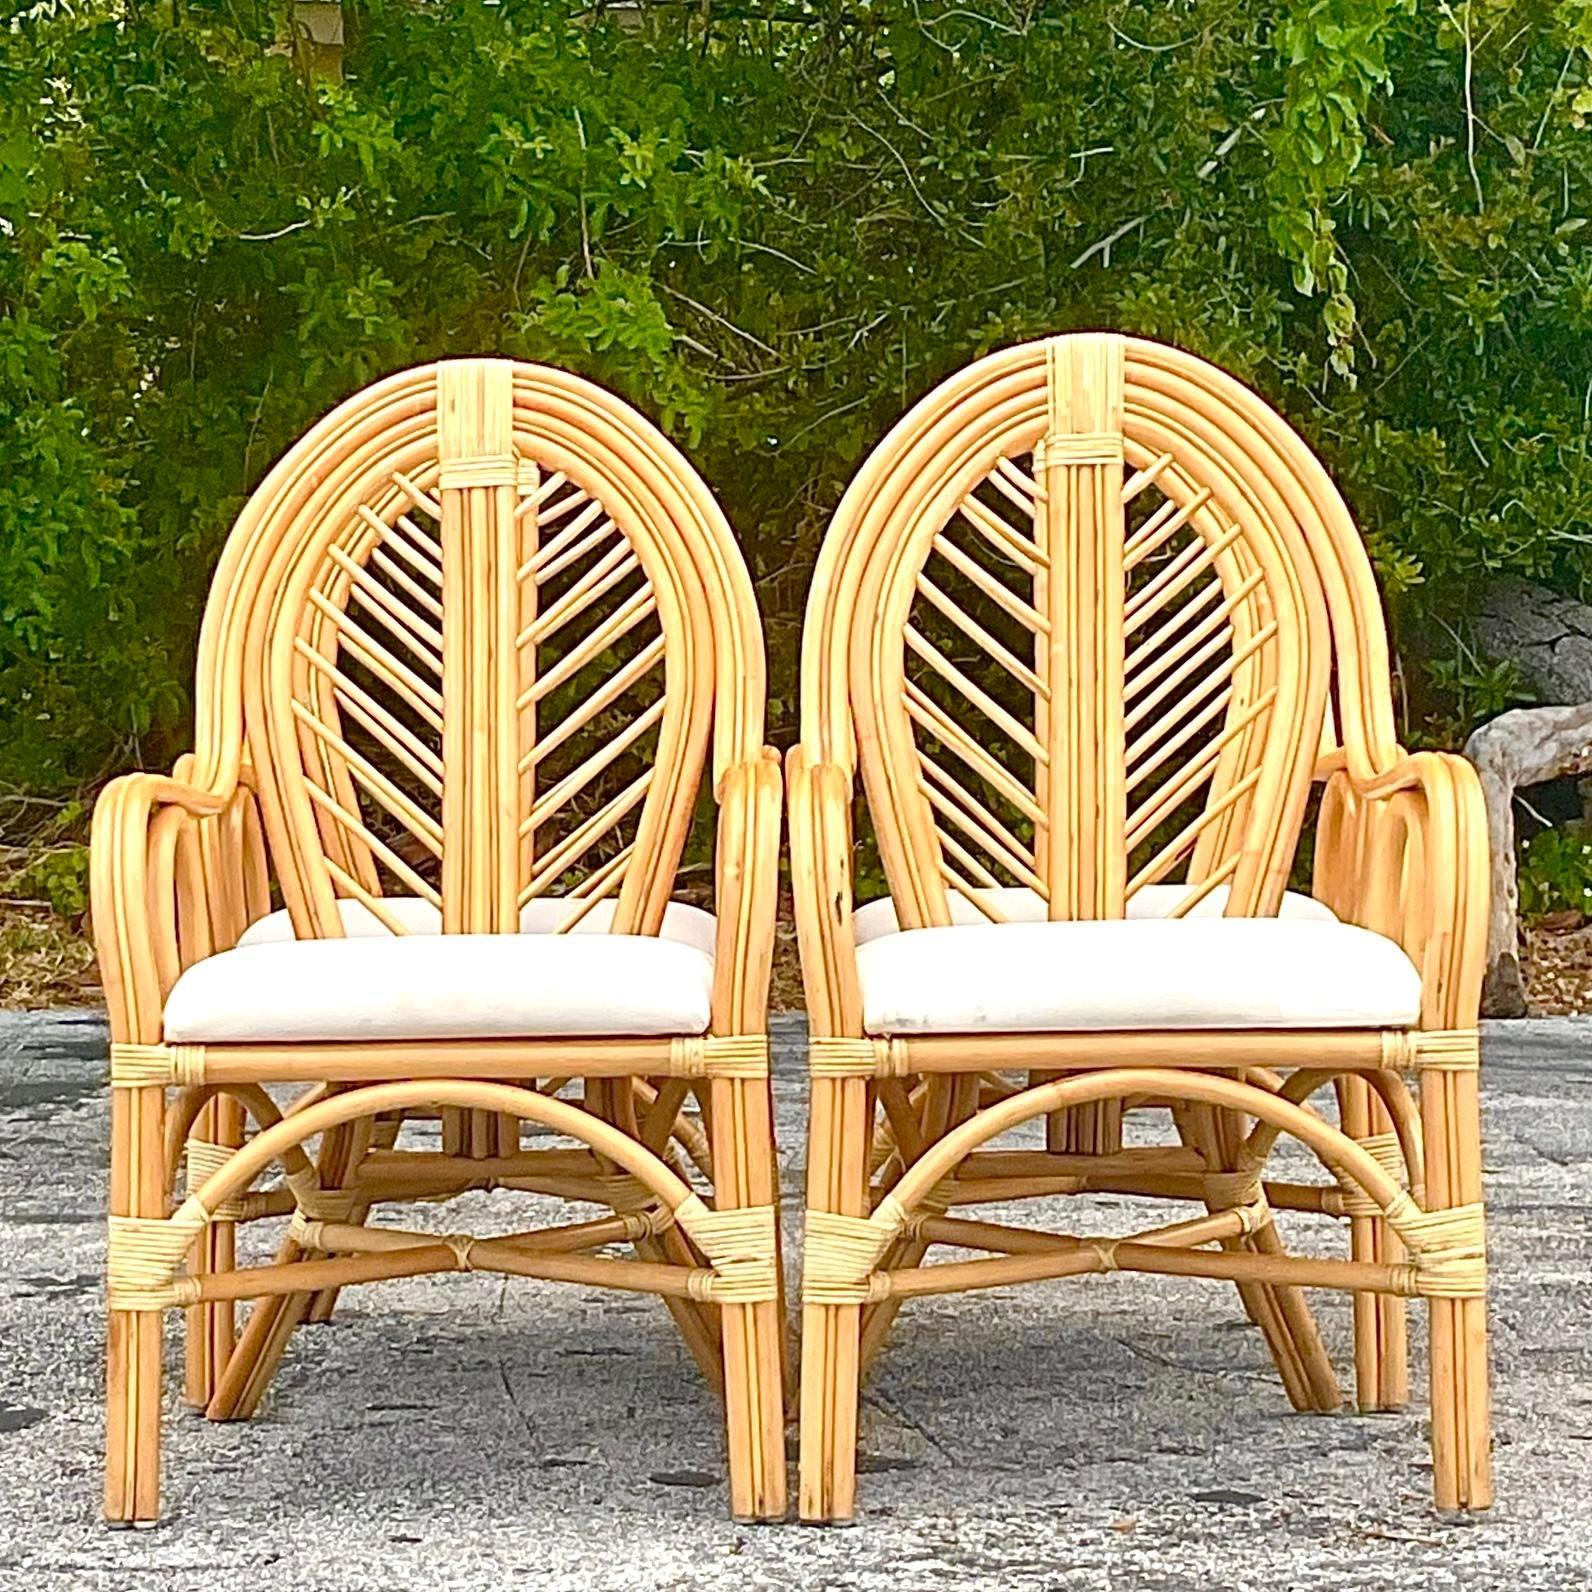 Philippine Vintage Coastal Bent Rattan Dining Chairs - Set of 4 For Sale